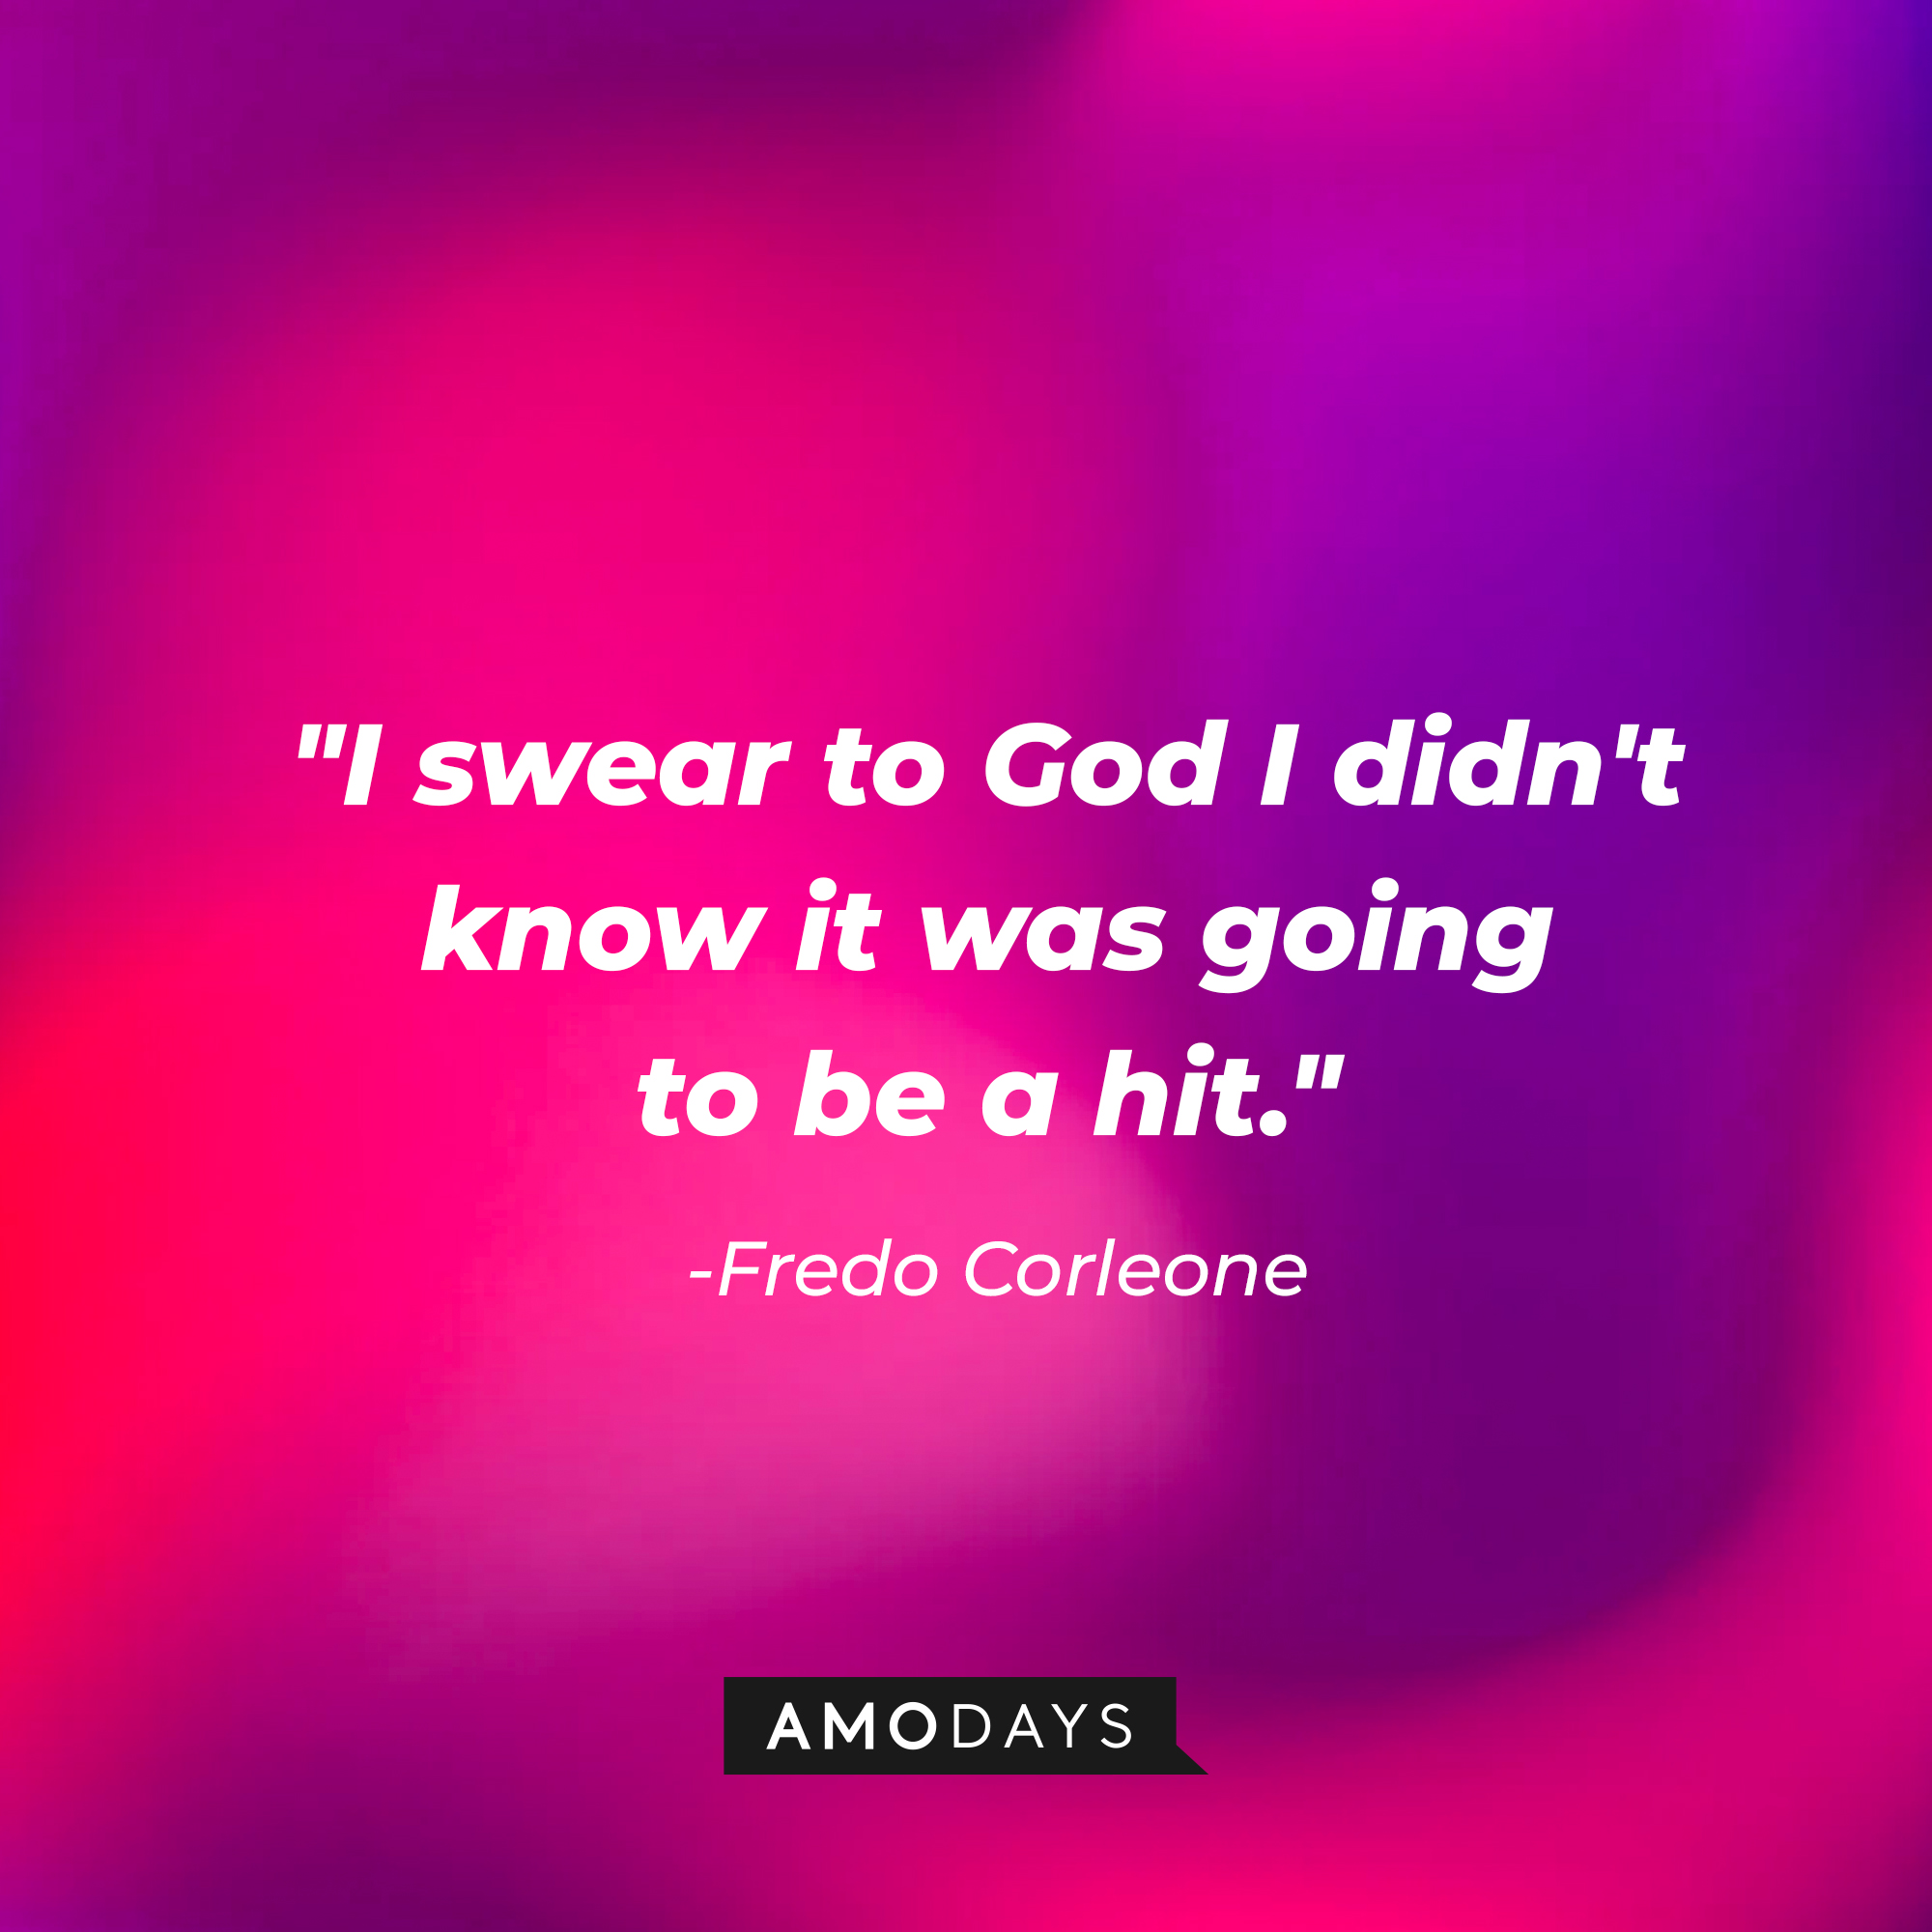 Fredo Corleone’s quote: "I swear to God I didn't know it was going to be a hit." | Source: AmoDays